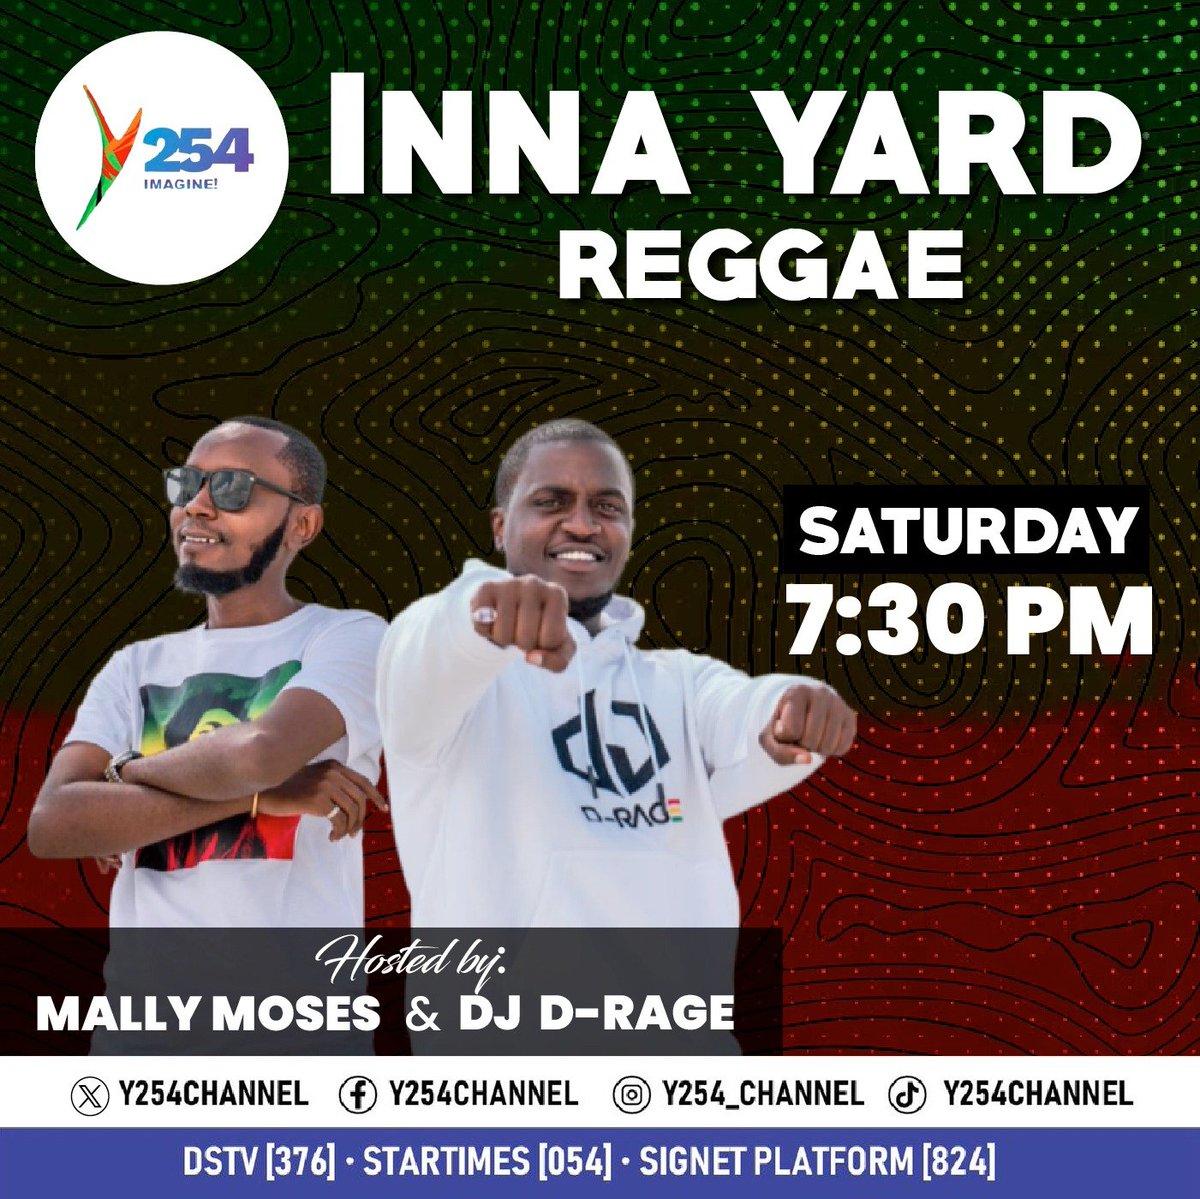 Tune in tonight at 7:30pm for the baddest reggae show in the 254, with Mally Moses and DJ D-Rage. #InnaYardReggae ^NK